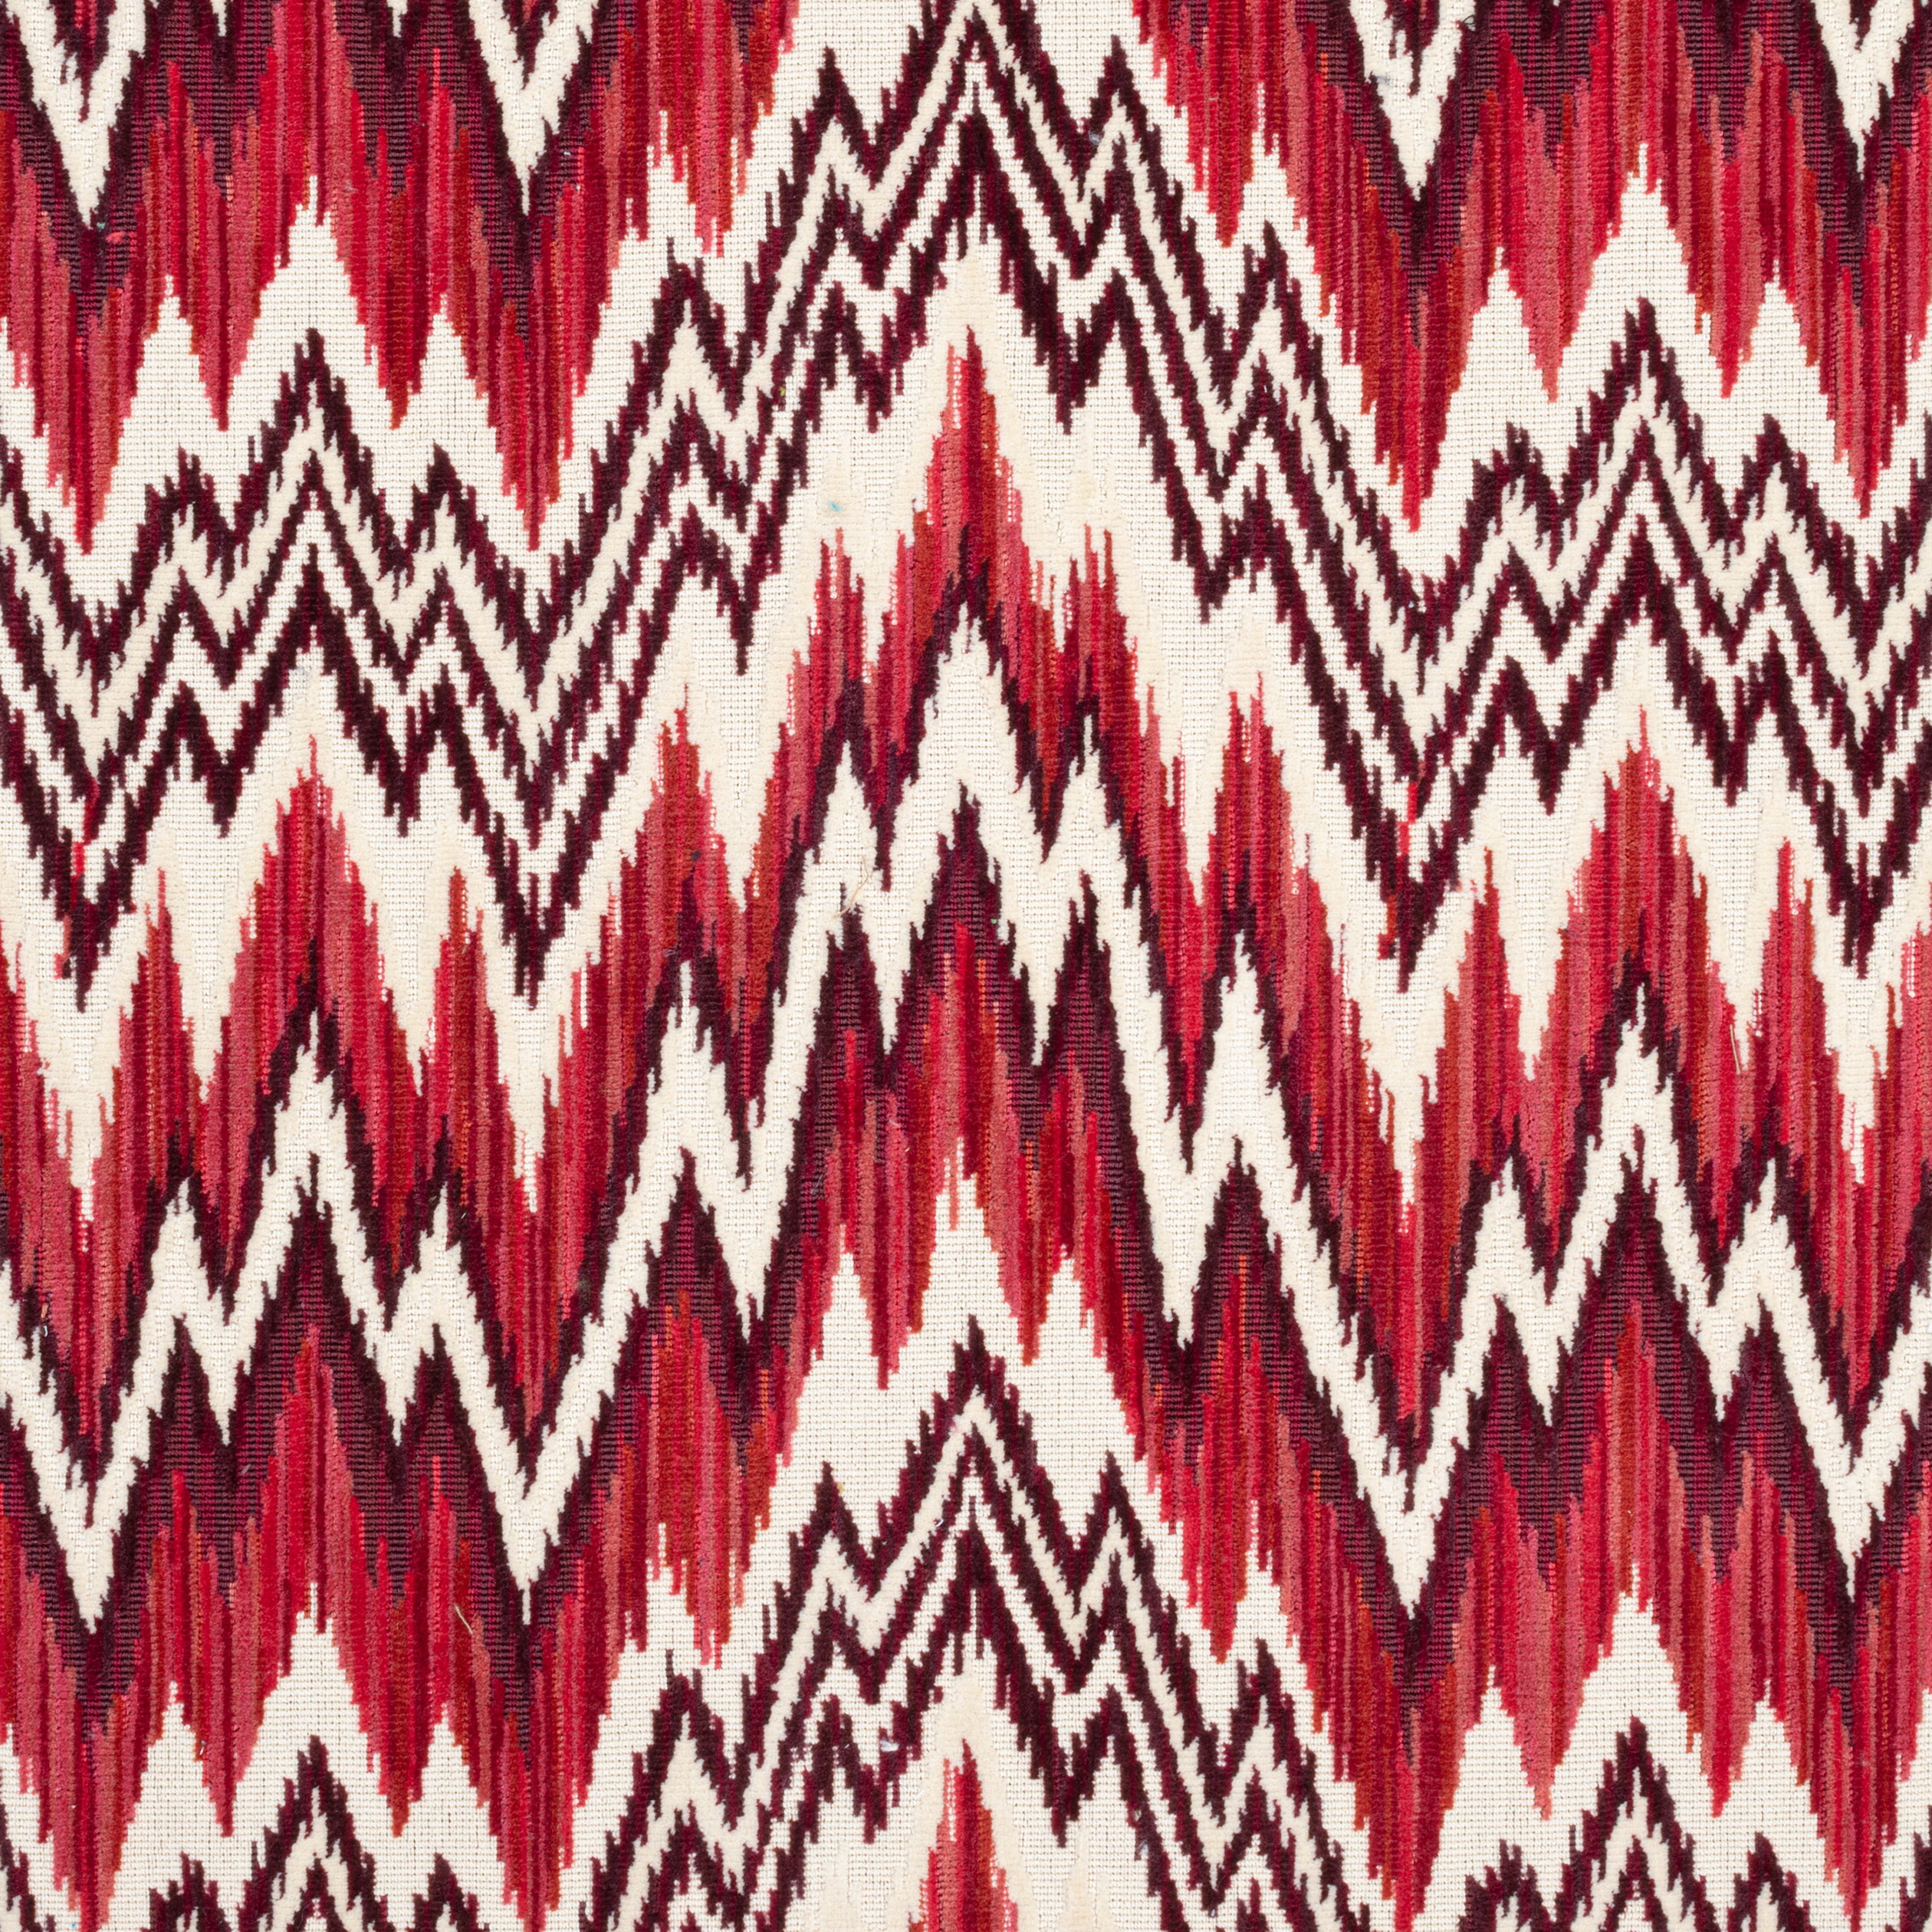 Rhythm Velvet fabric in ruby and garnet color - pattern number W72818 - by Thibaut in the Woven Resource 13: Fusion Velvets collection